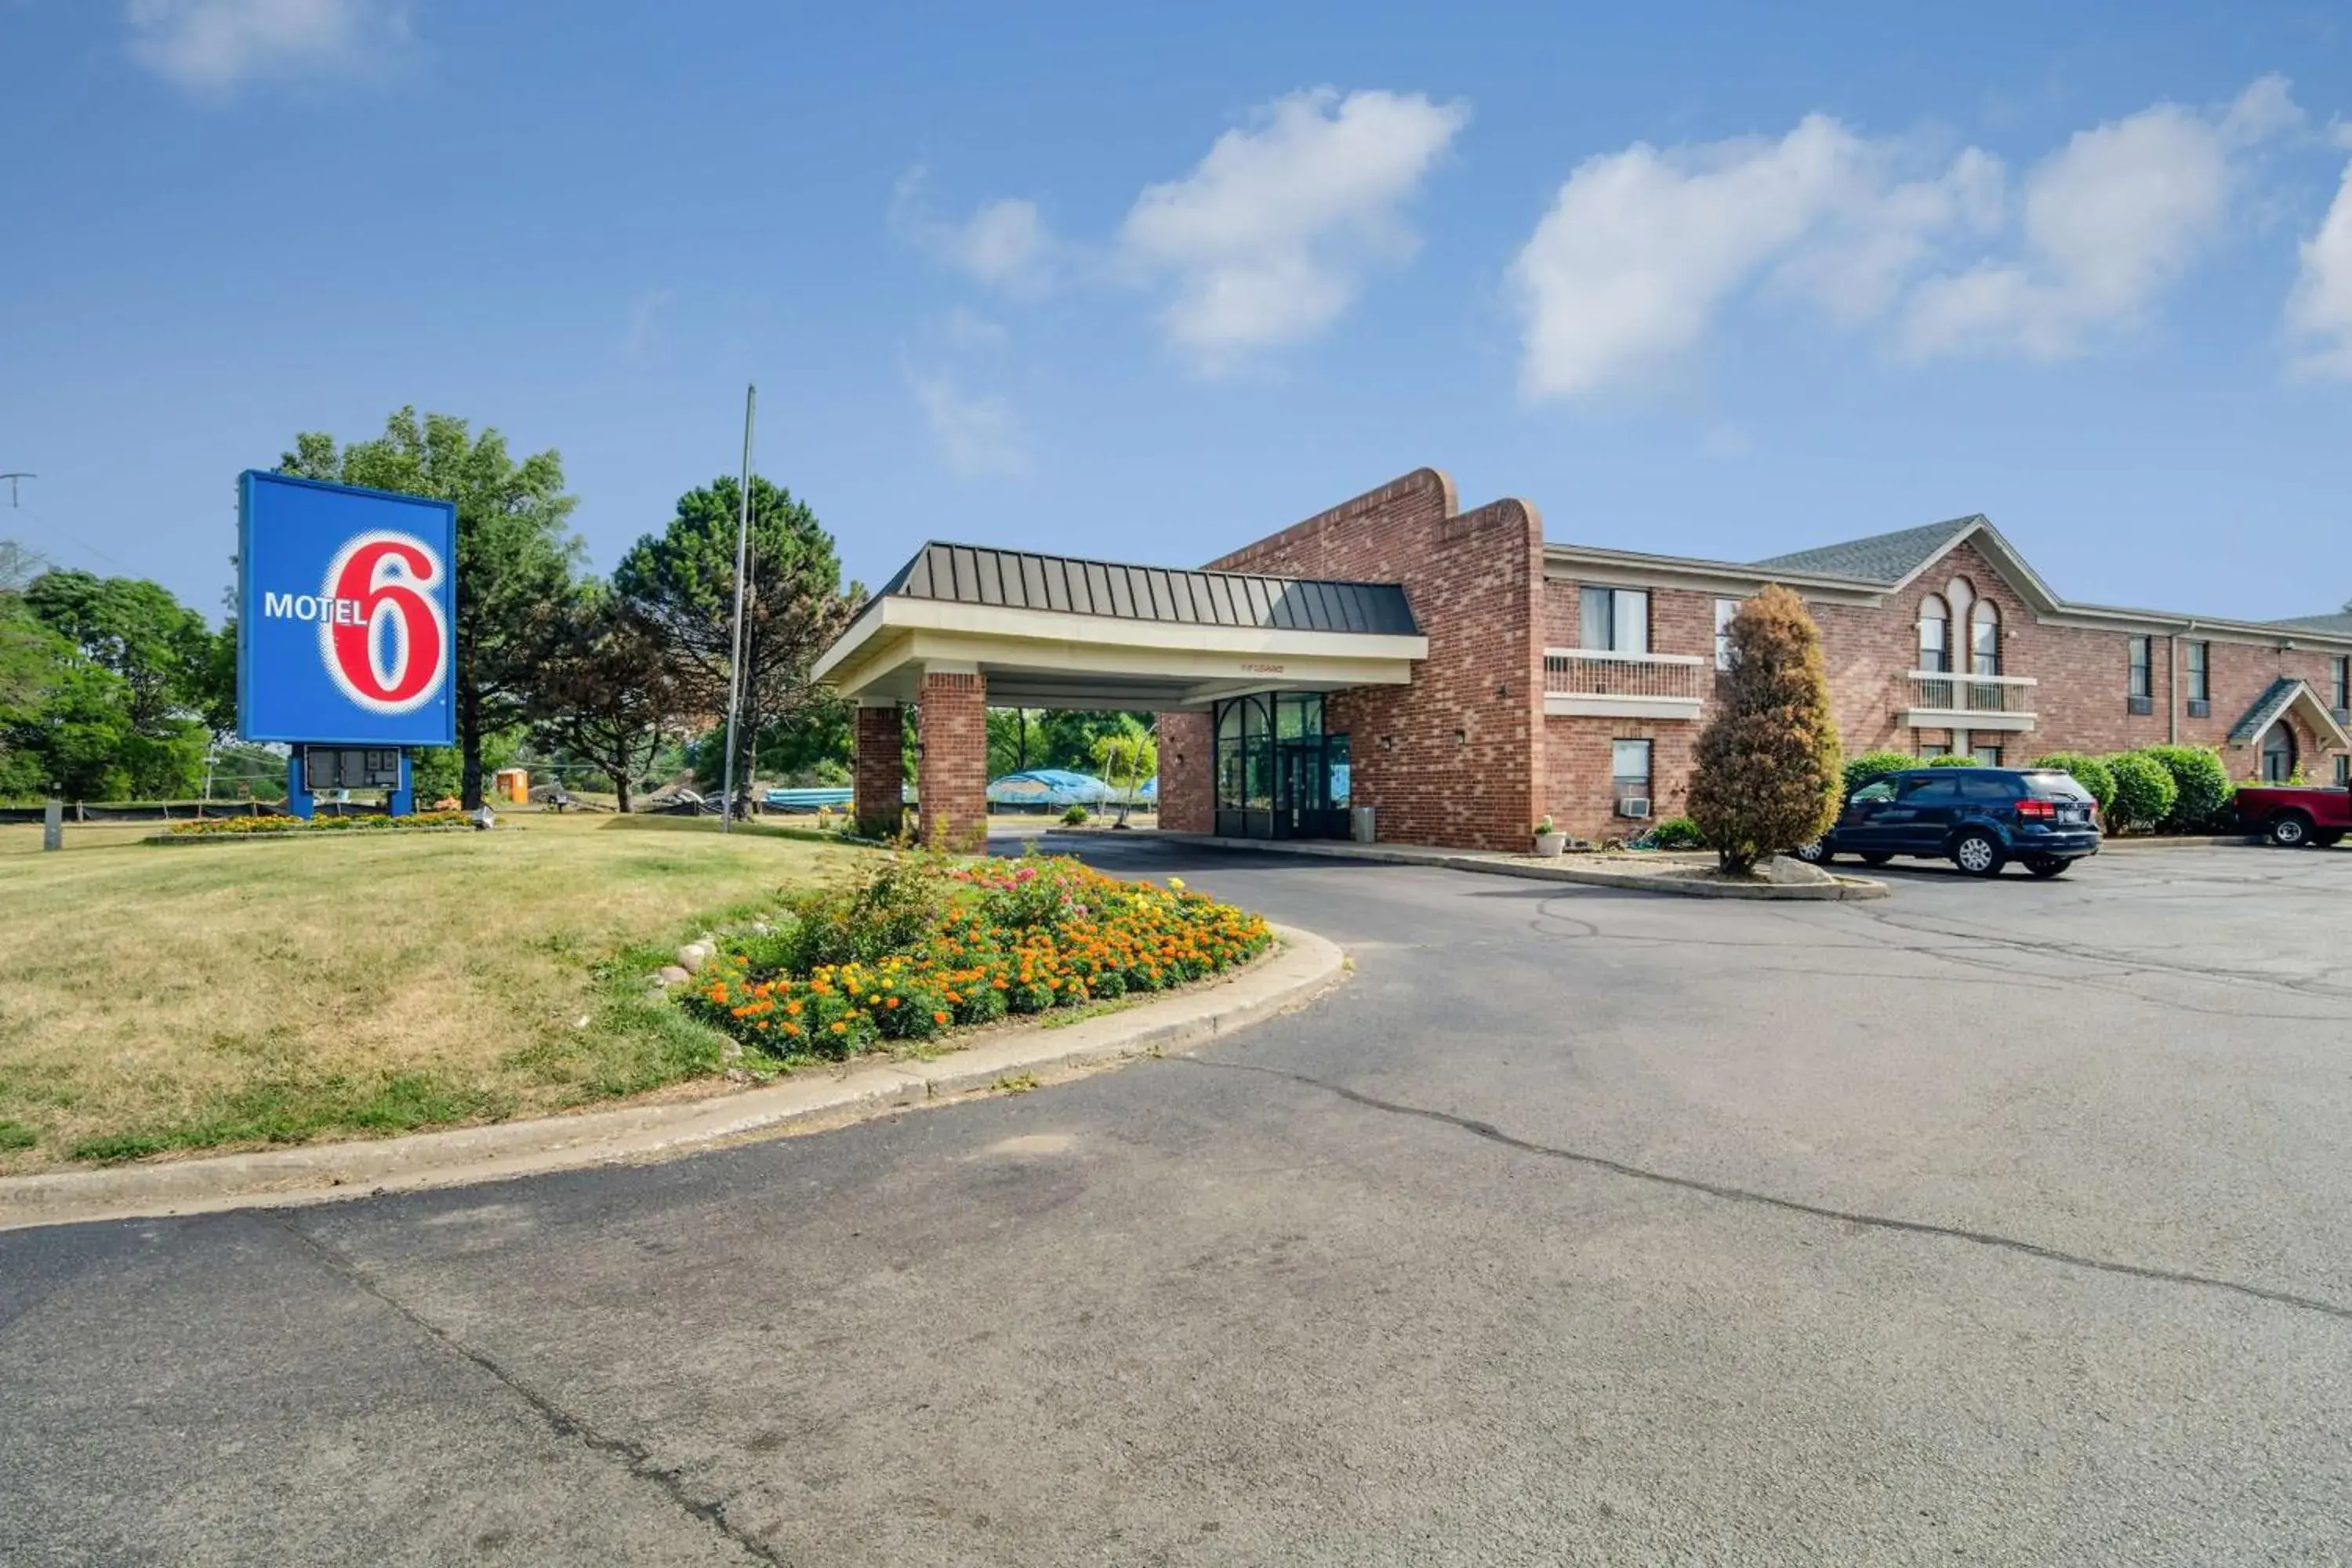 Property building in Motel 6-Waukegan, IL